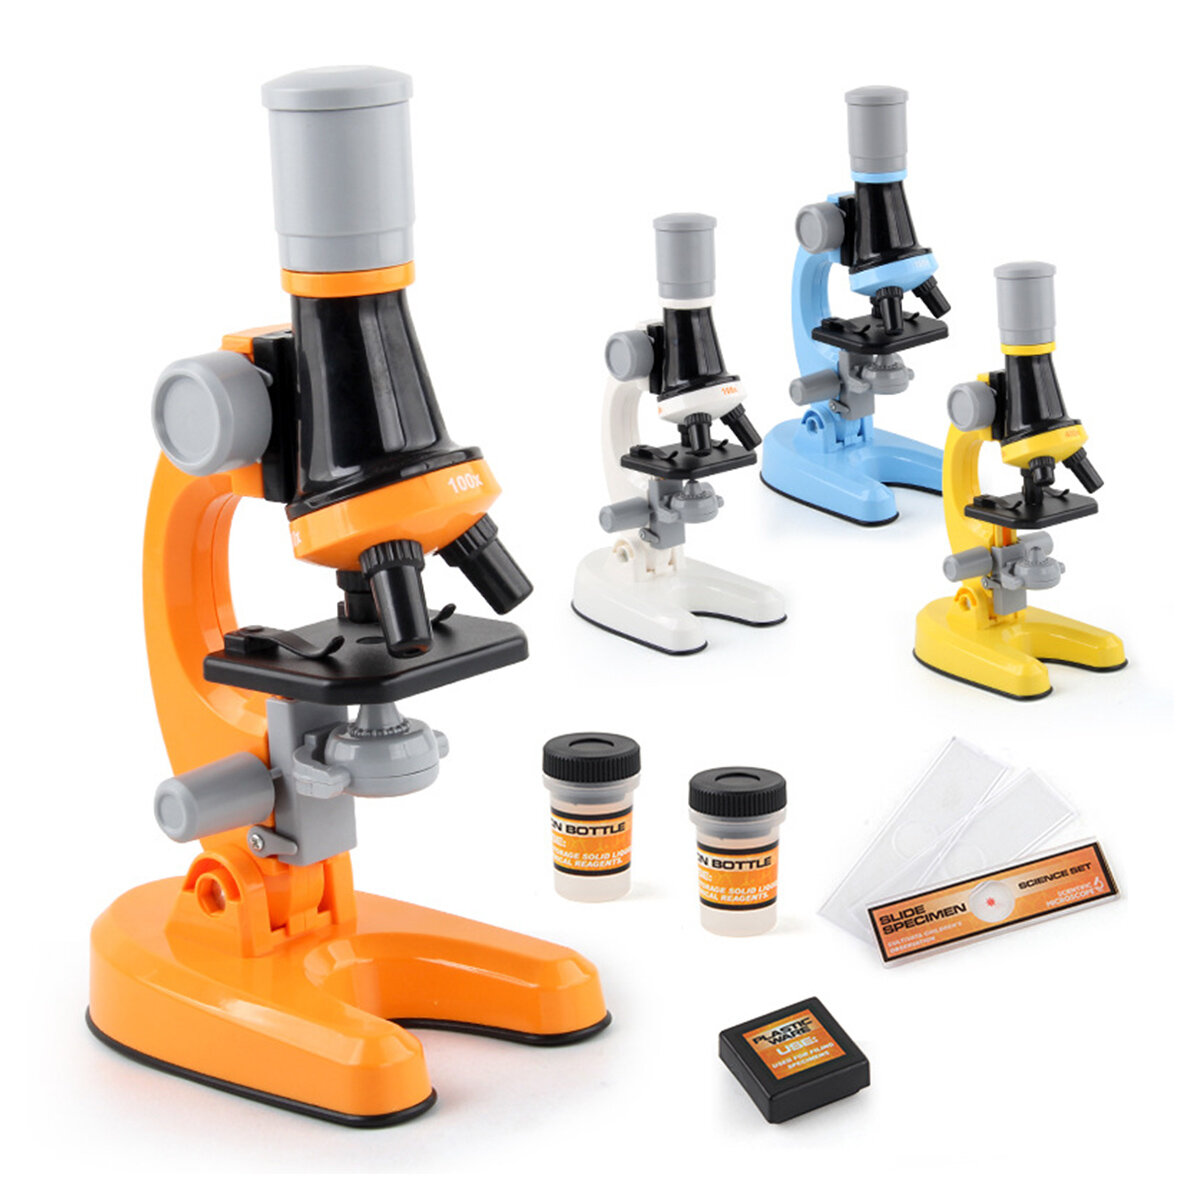 

100X/400X/1200X Children's Biological Microscope Elementary School Science Education Toy Tool